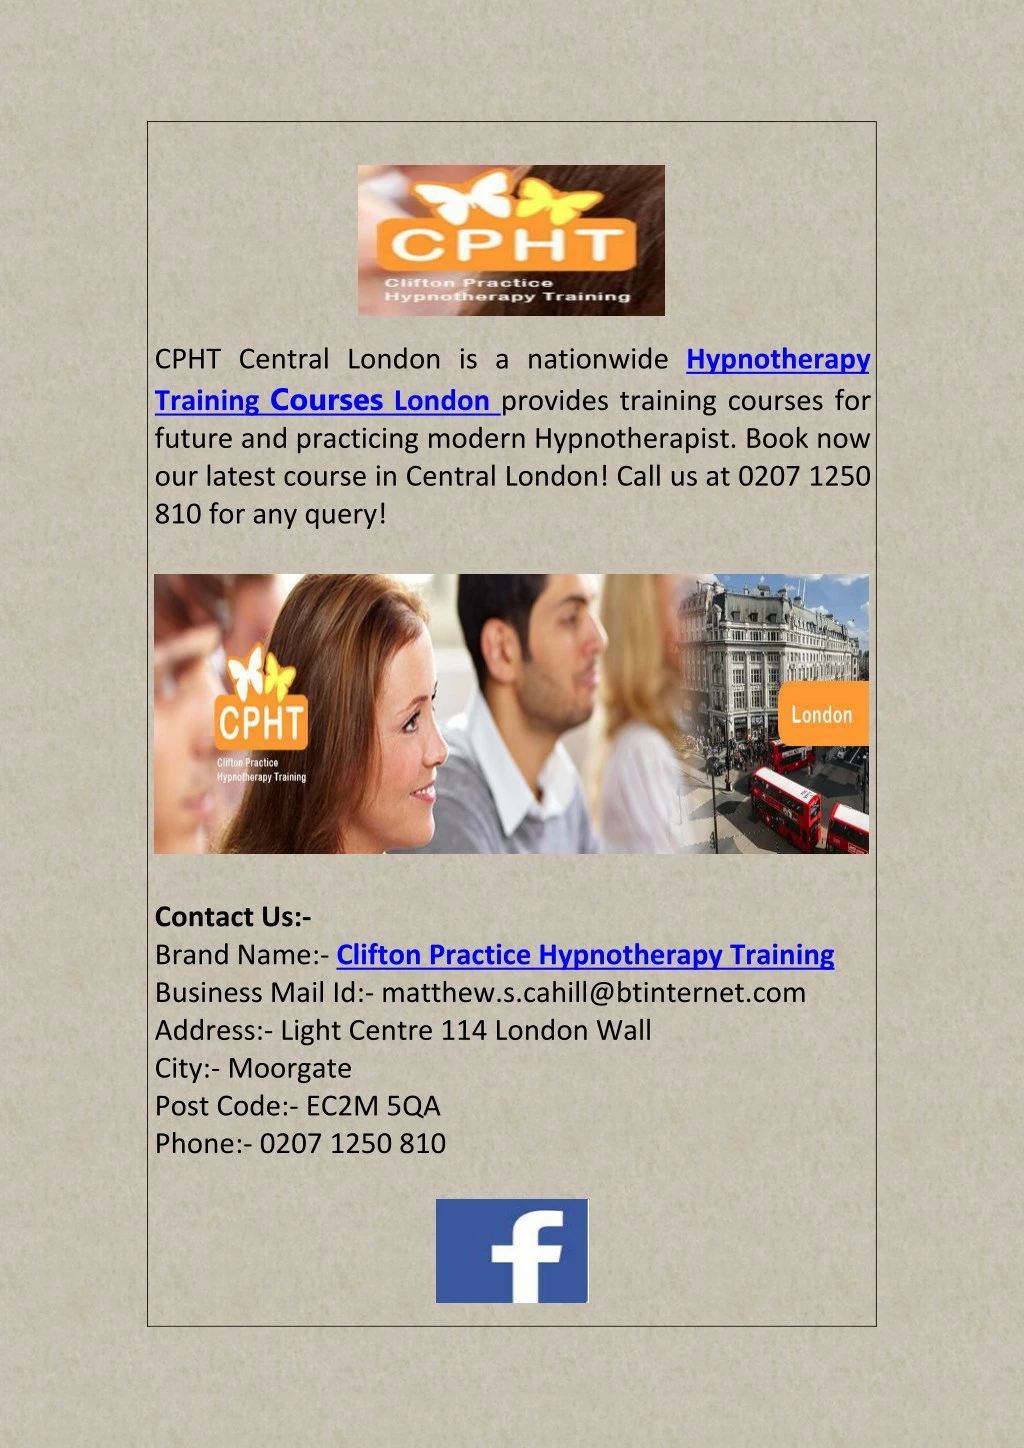 cpht central london is a nationwide hypnotherapy